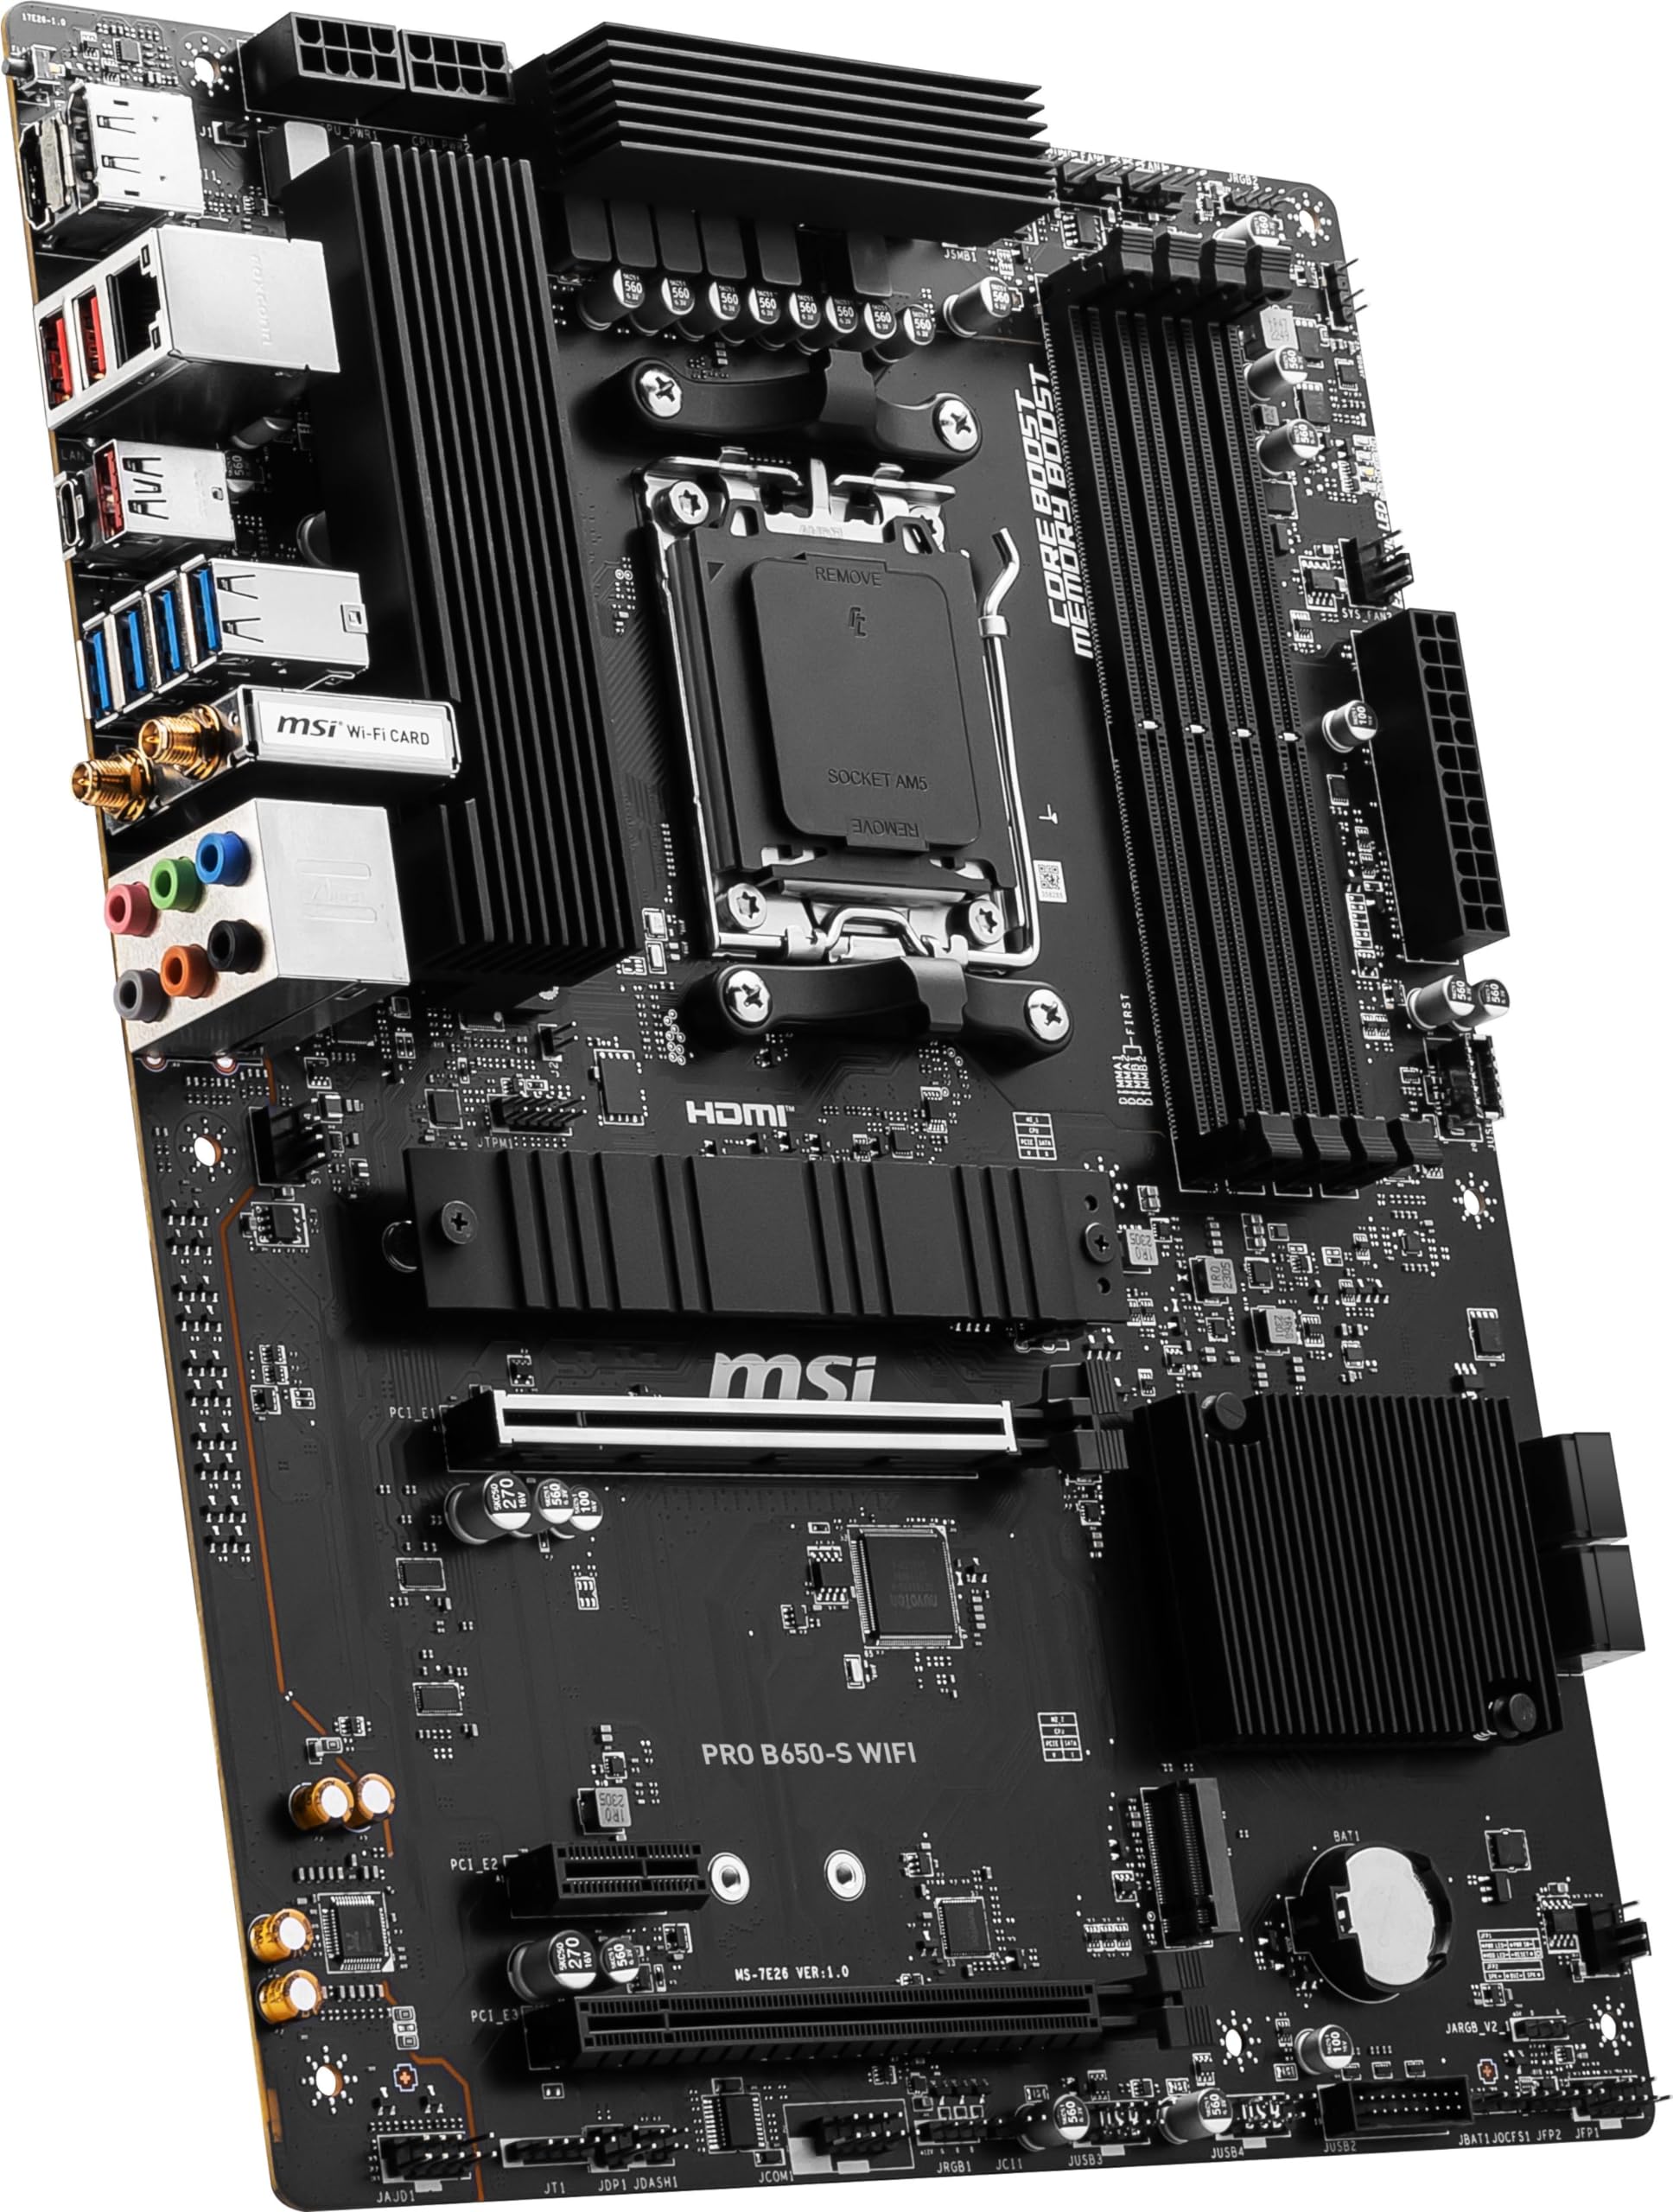 MSI PRO B650-S WiFi ProSeries Motherboard (Supports AMD Ryzen 7000 Series Processors, AM5, DDR5, PCIe 4.0, M.2 Slots, SATA 6Gb/s, USB 3.2 Gen 2, HDMI/DP, Wi-Fi 6E, 2.5Gbps LAN, ATX)